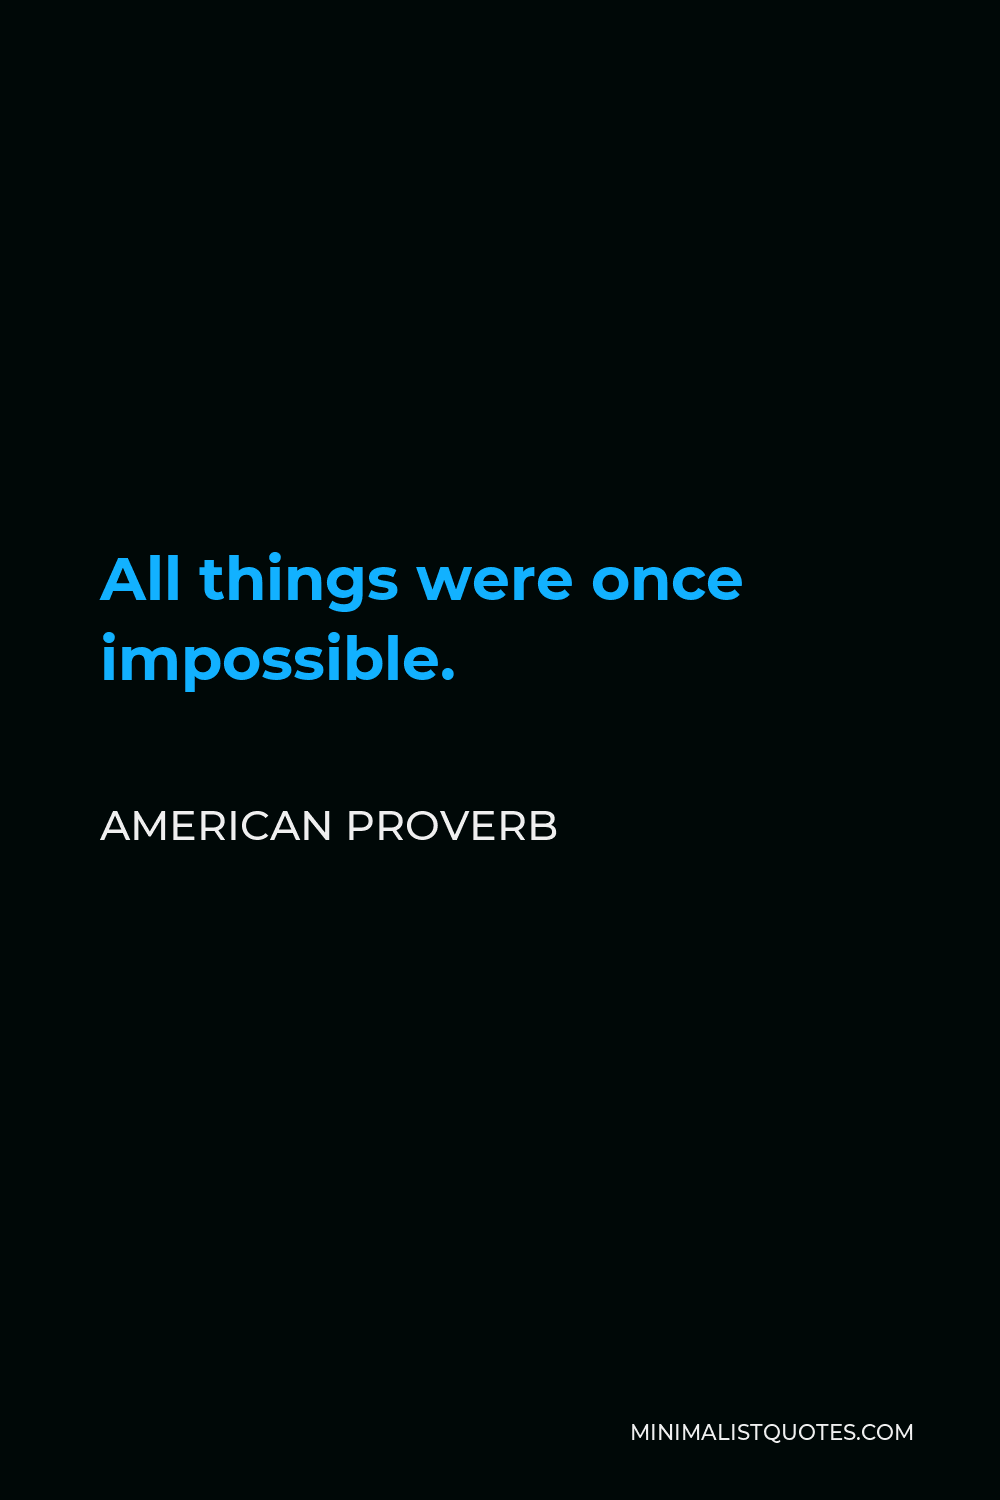 American Proverb Quote - All things were once impossible.